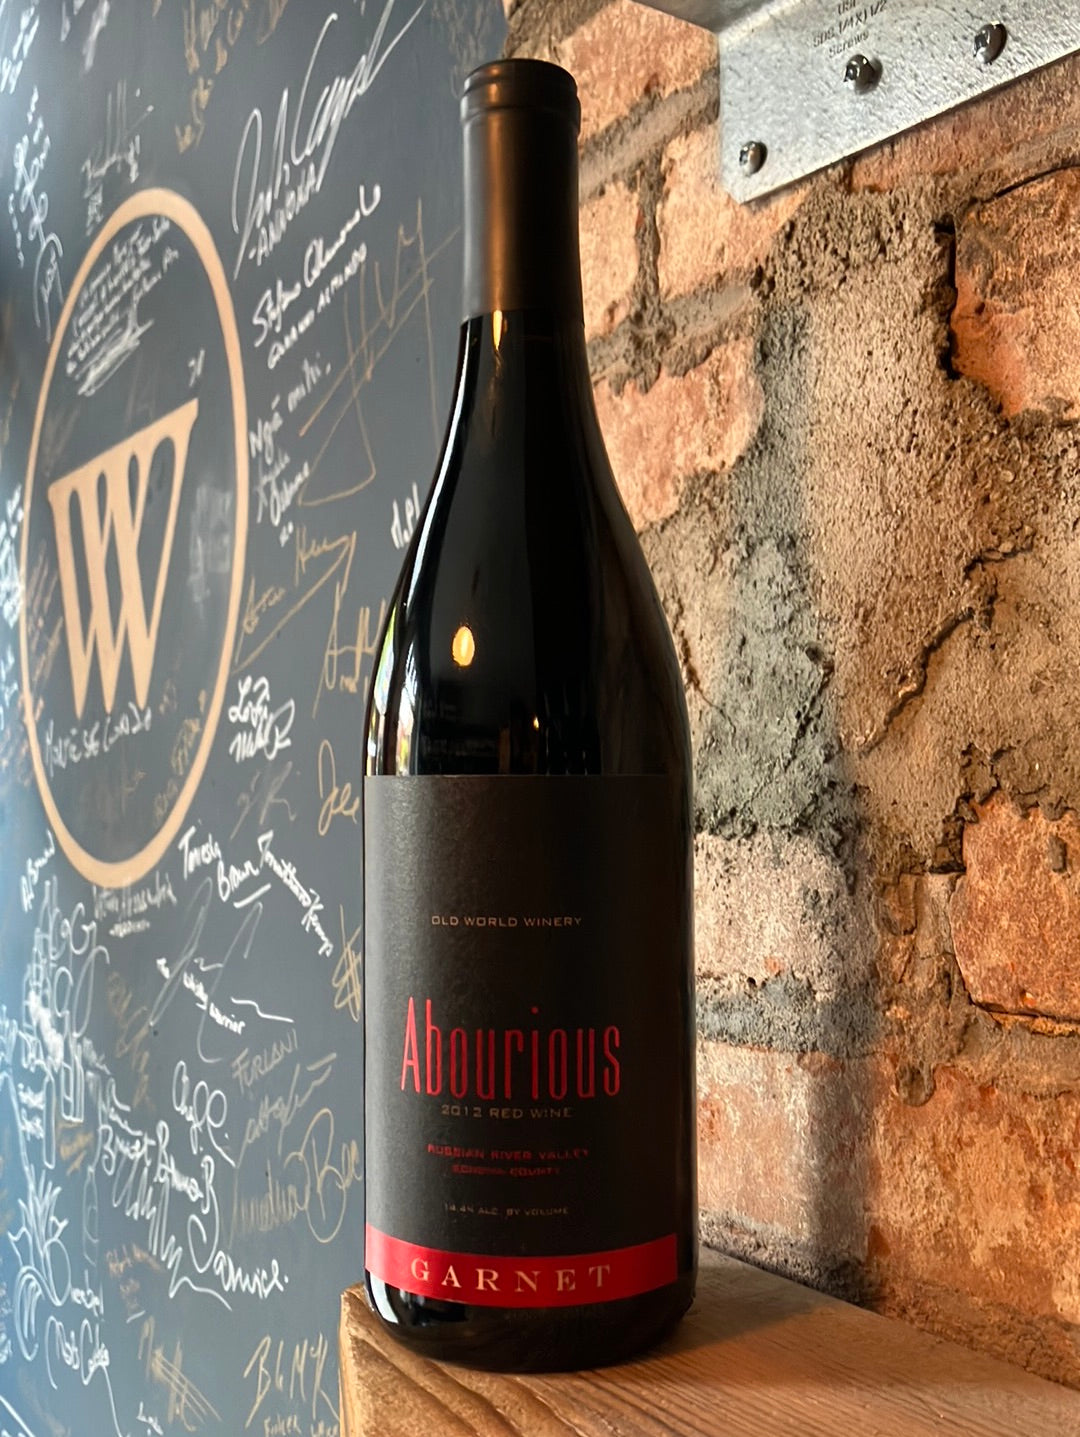 Old World Winery 'Abourious Garnet' Russian River 2012